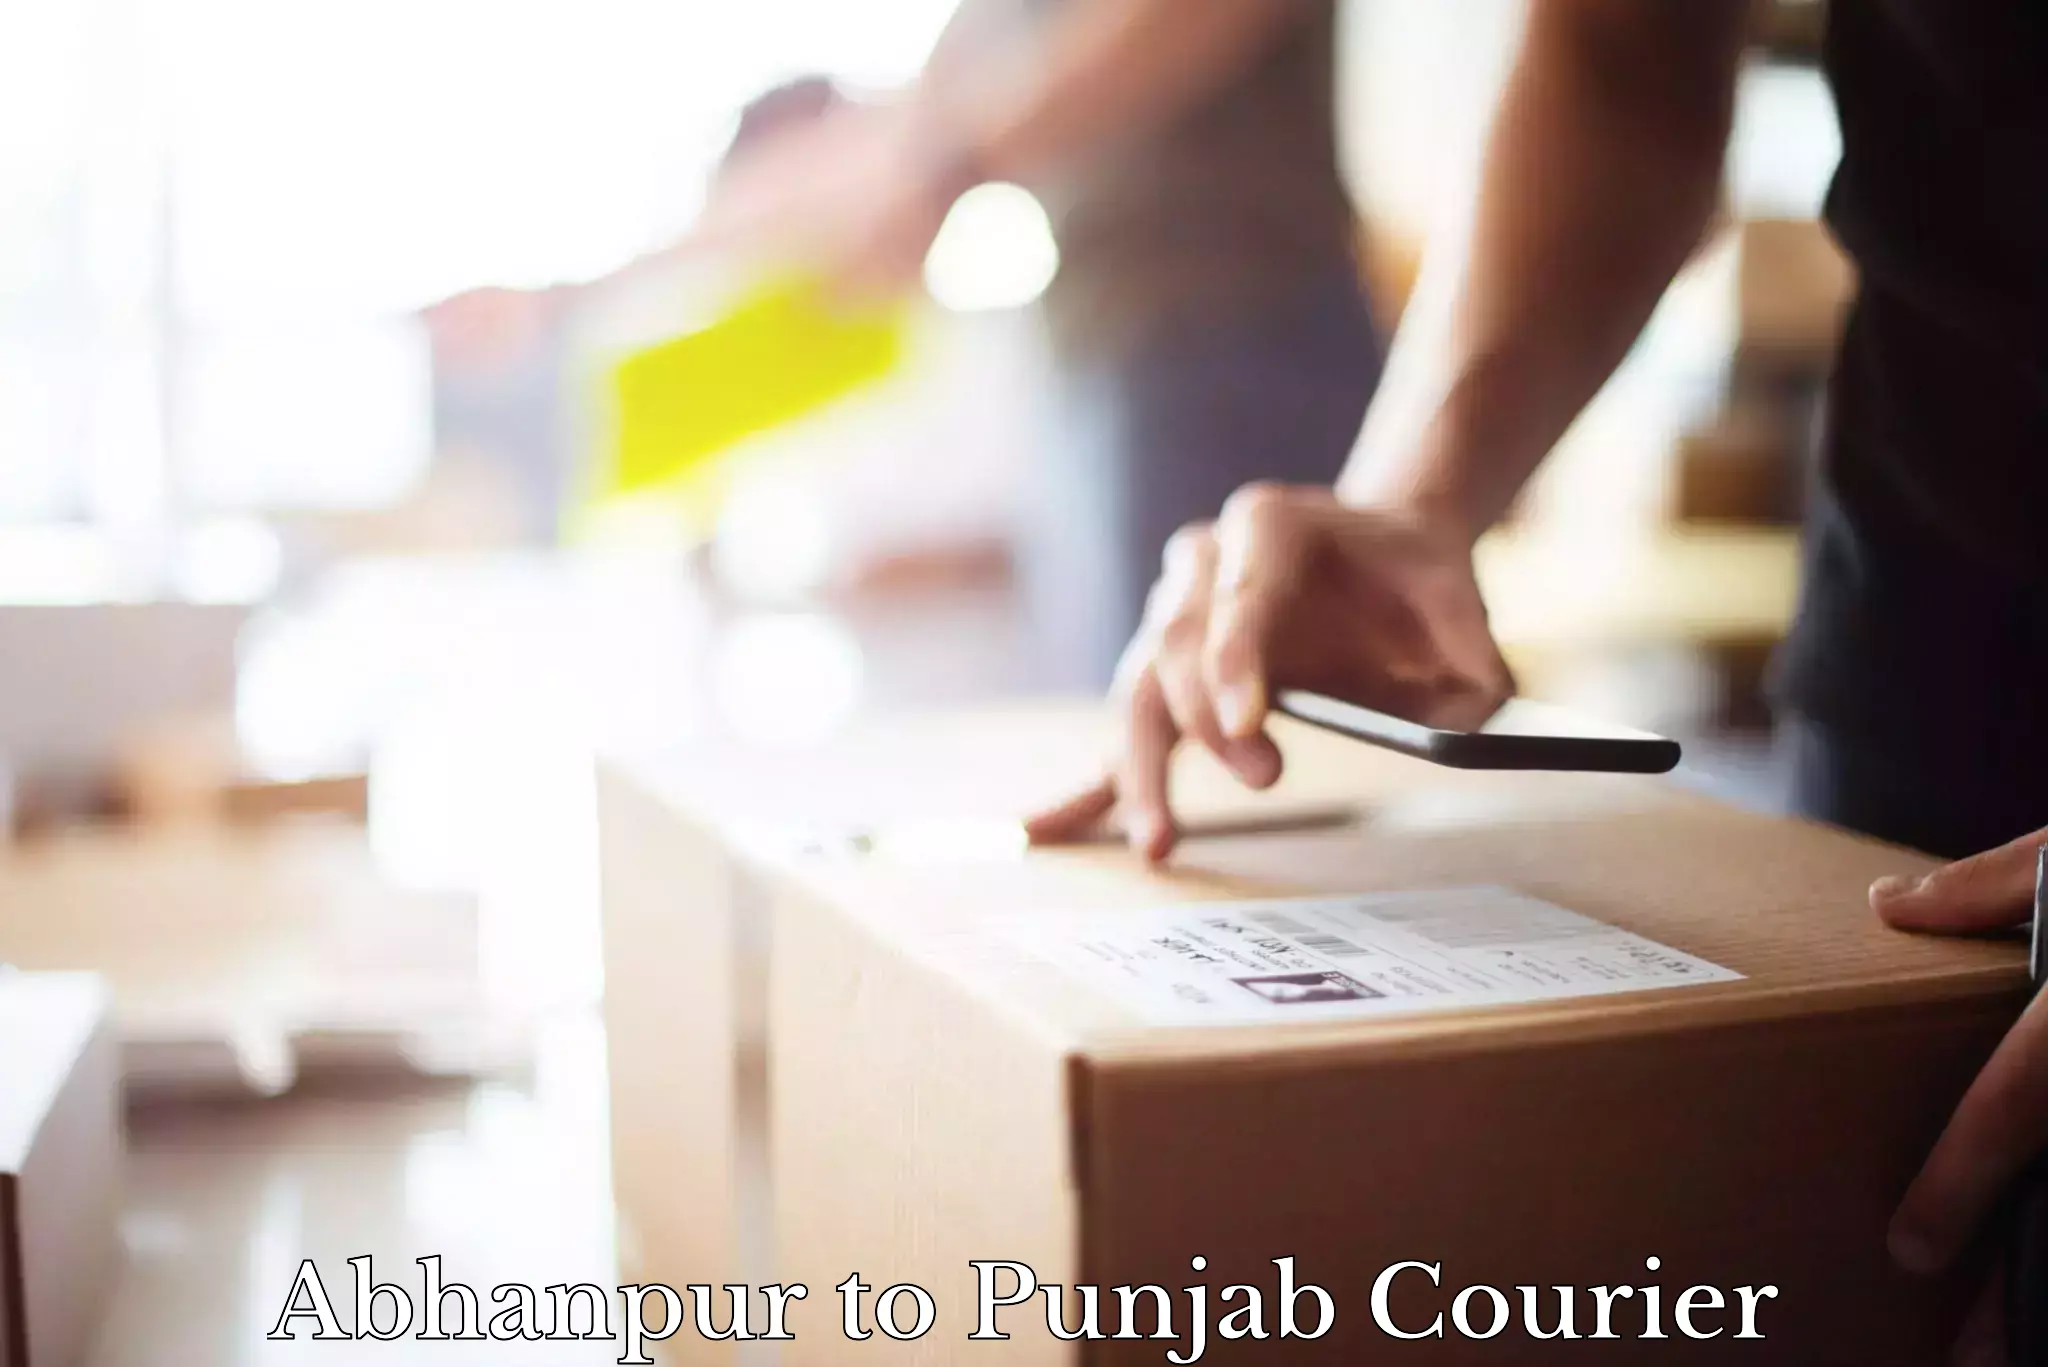 On-call courier service Abhanpur to Sangrur